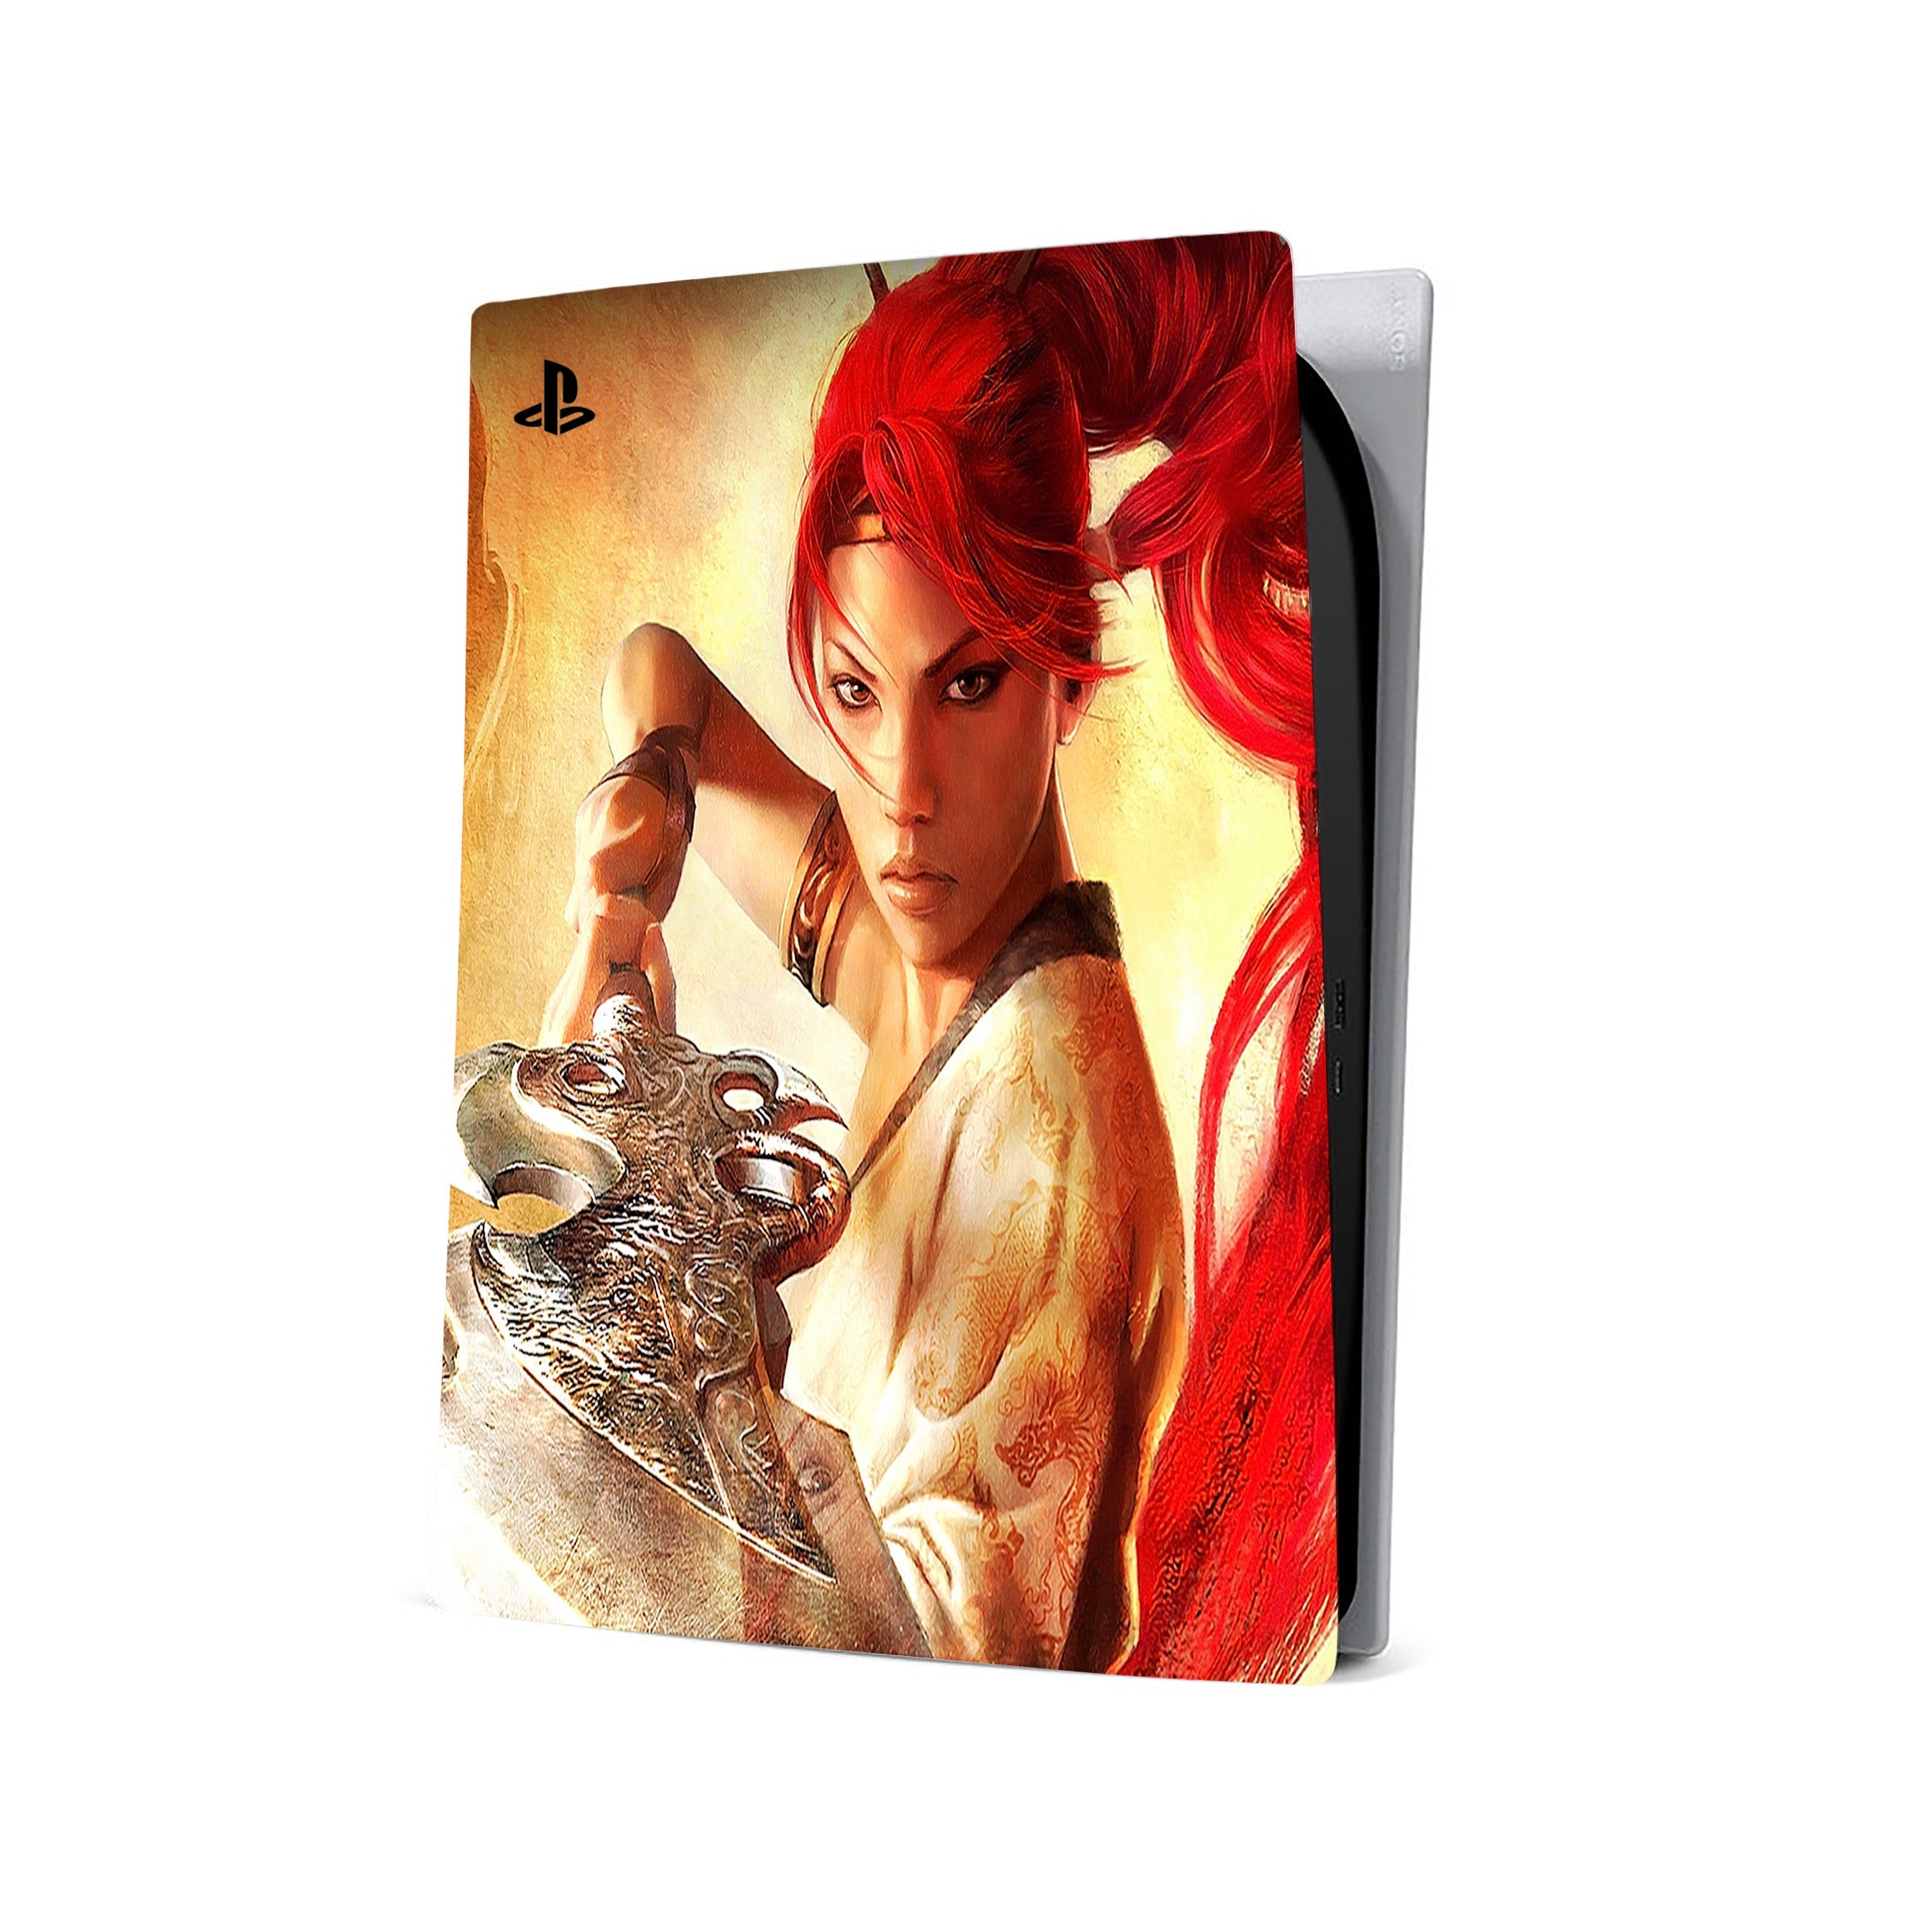 A video game skin featuring a Heavenly Sword design for the PS5.